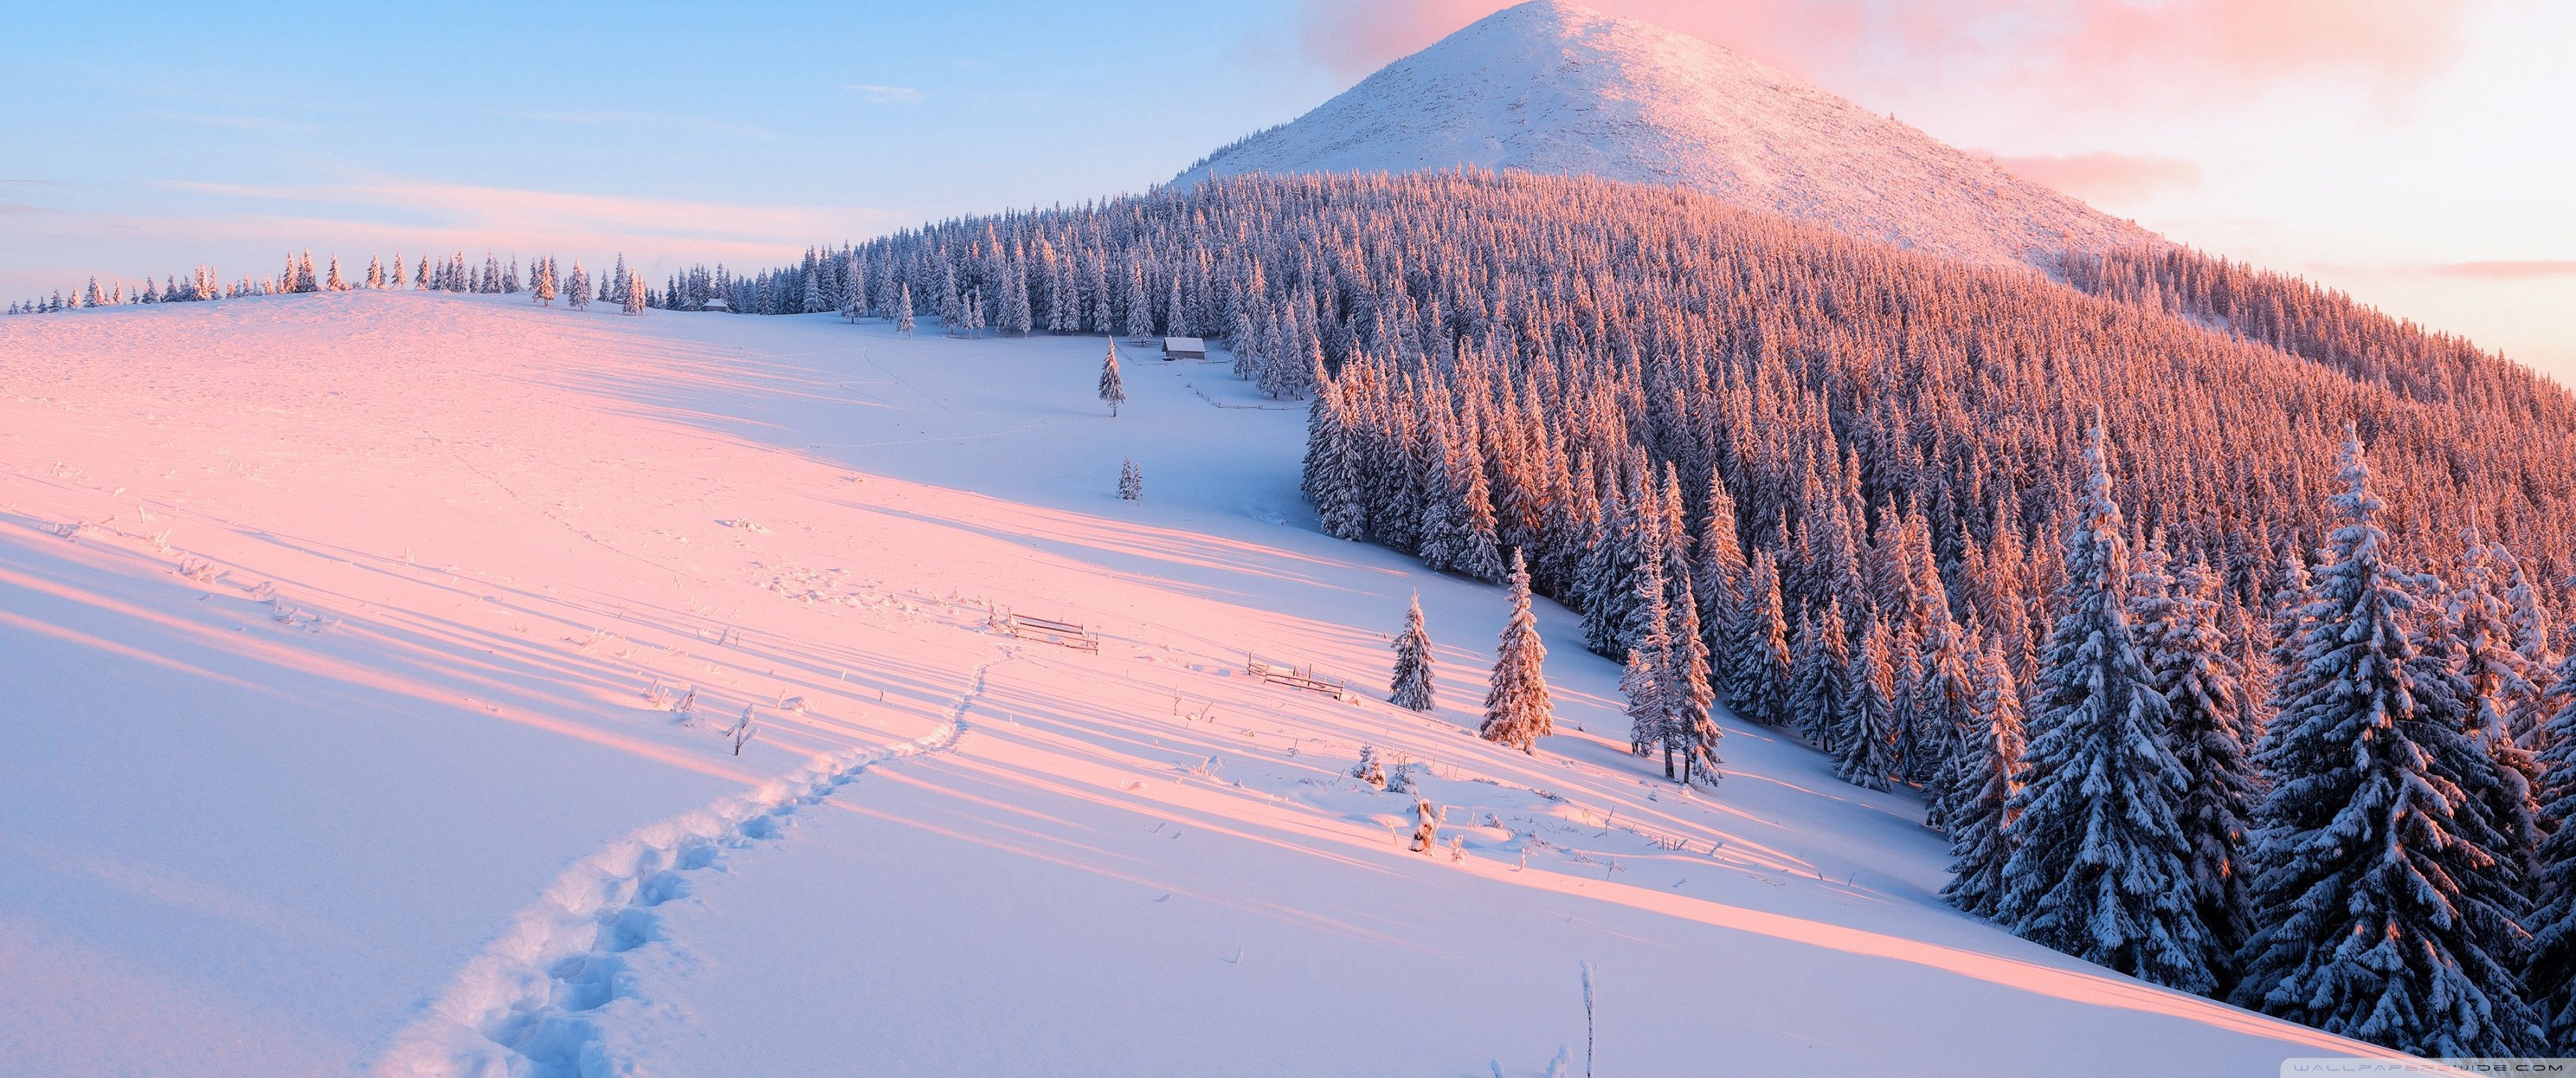 A snow covered mountain with trees and footprints in the snow. - 3440x1440, snow